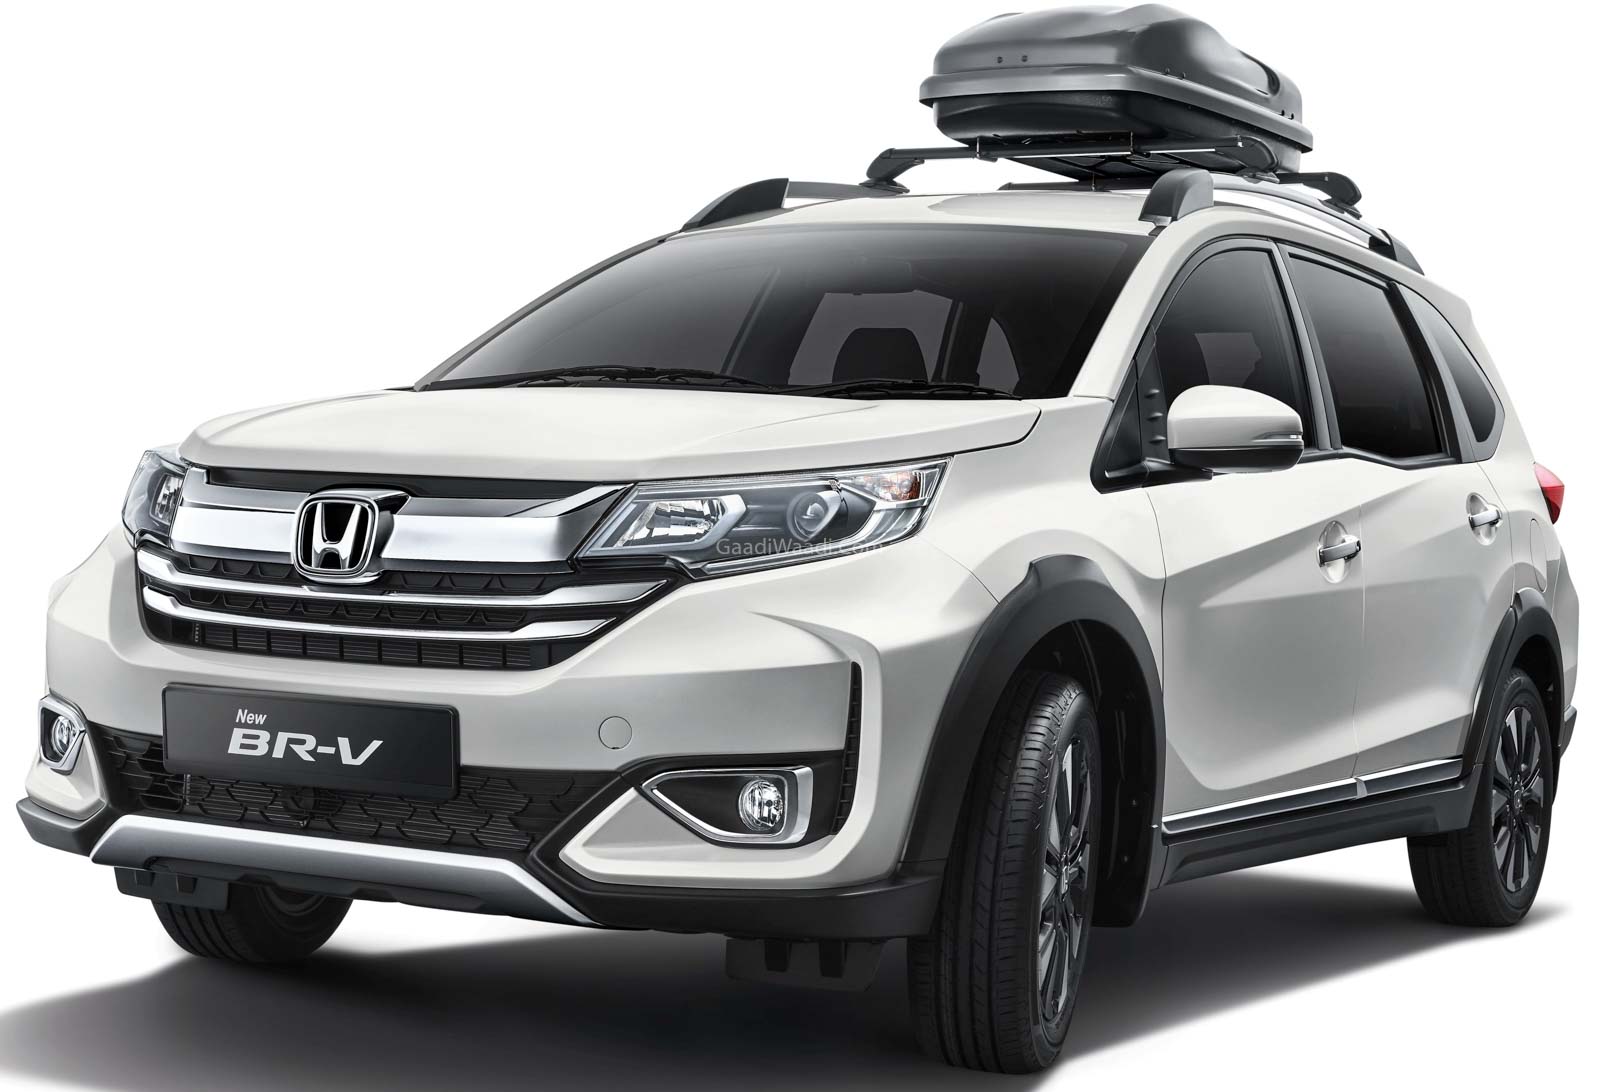 Honda Br V Facelift Launched In Malaysia In 2 Variants